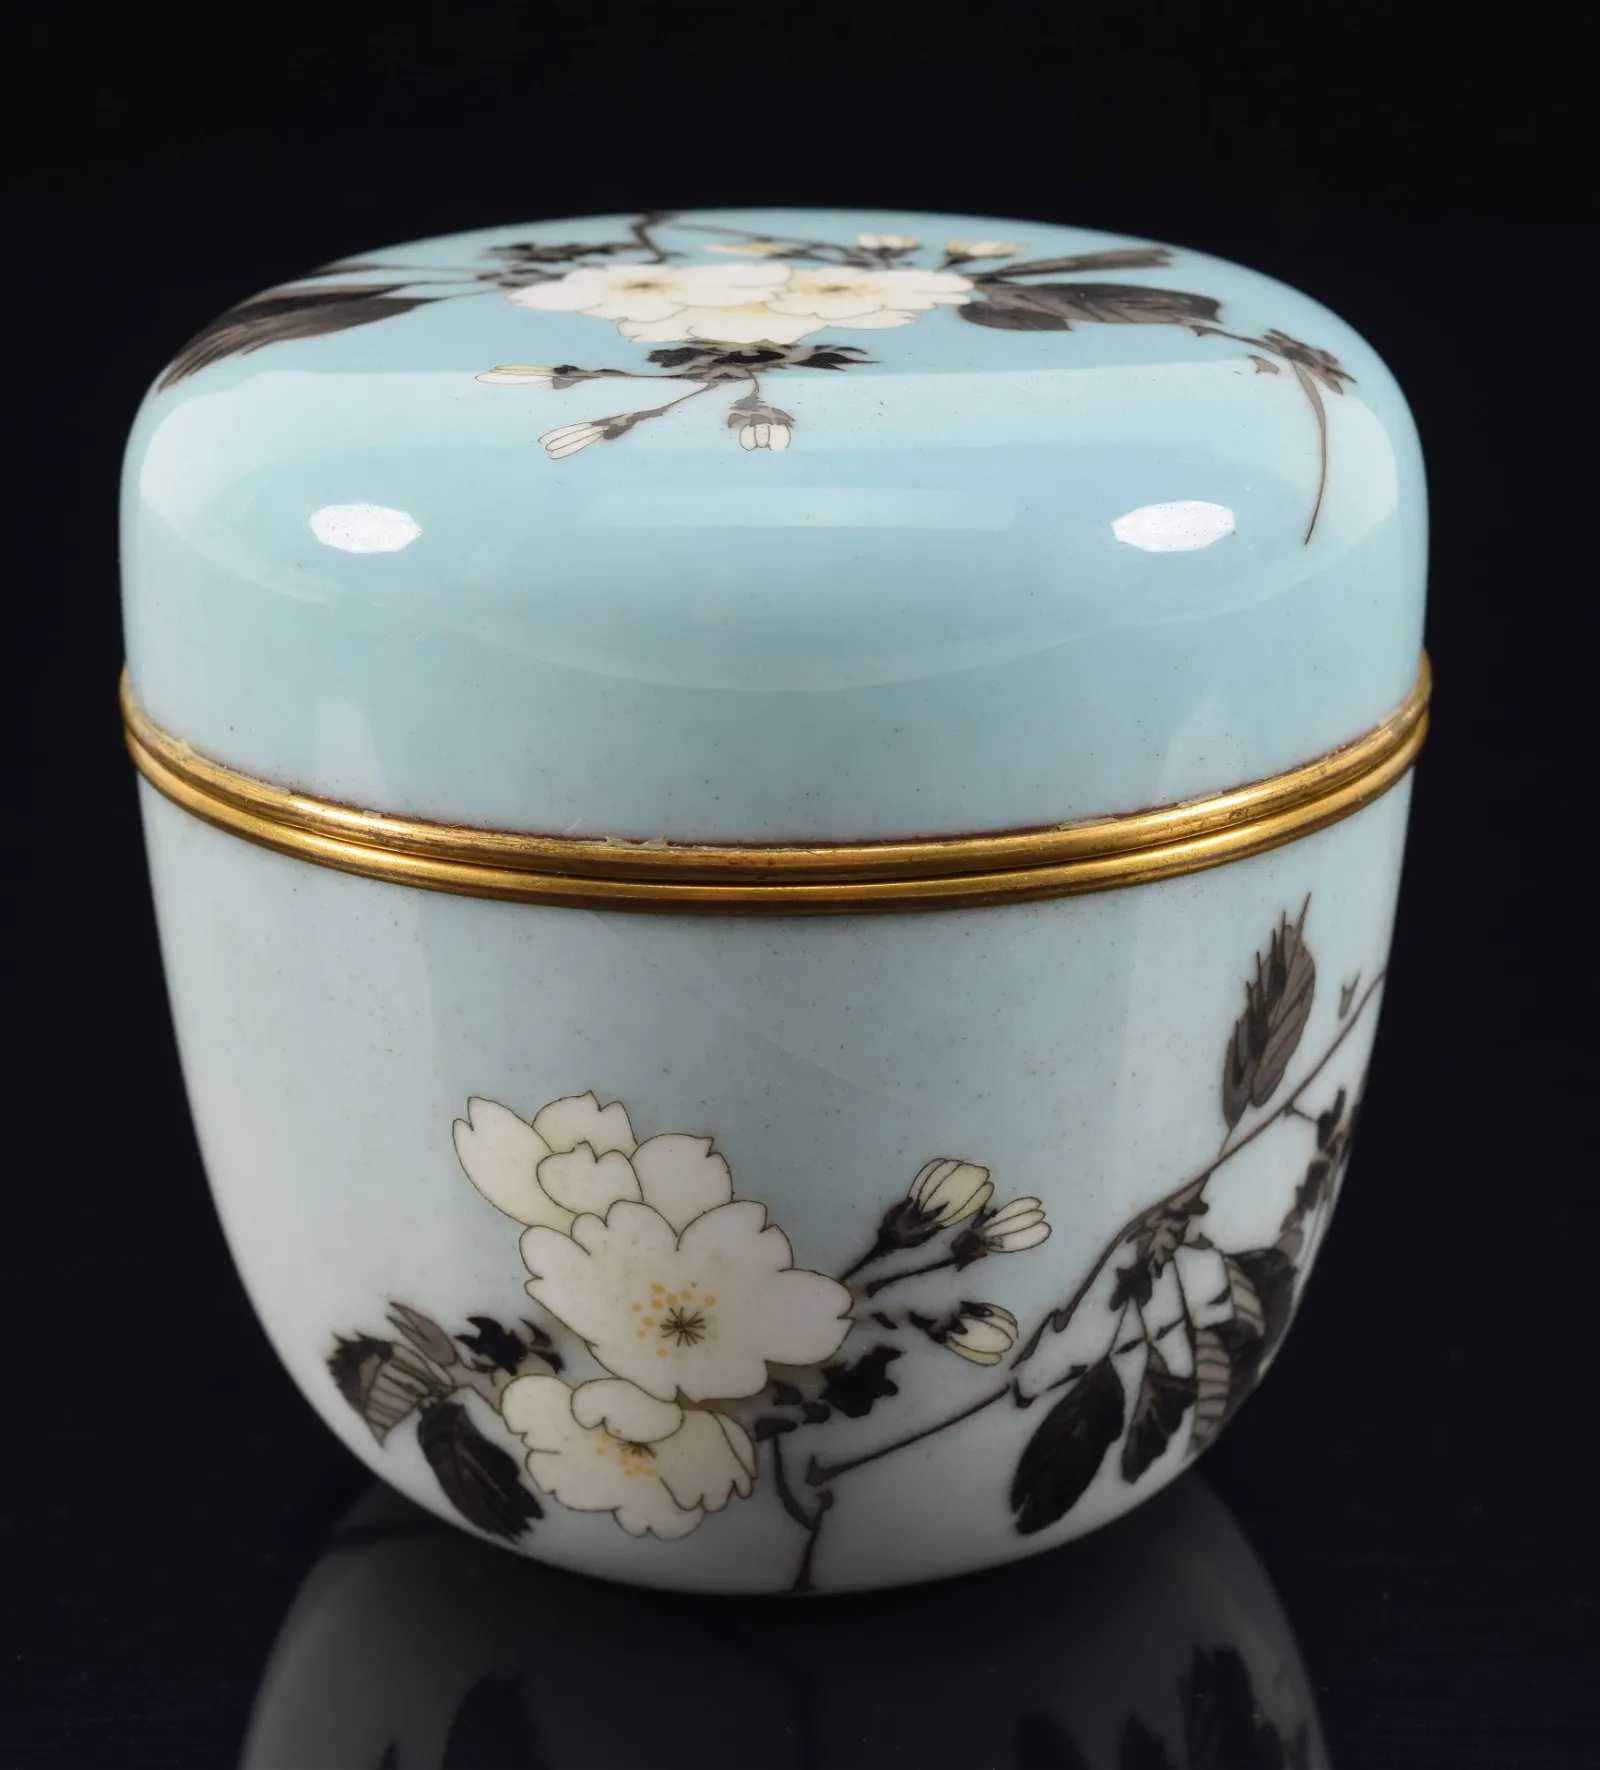 Namikawa Sosuke wireless cloisonne box and cover, estimated at $3,000-$5,000 at Tremont Auctions.